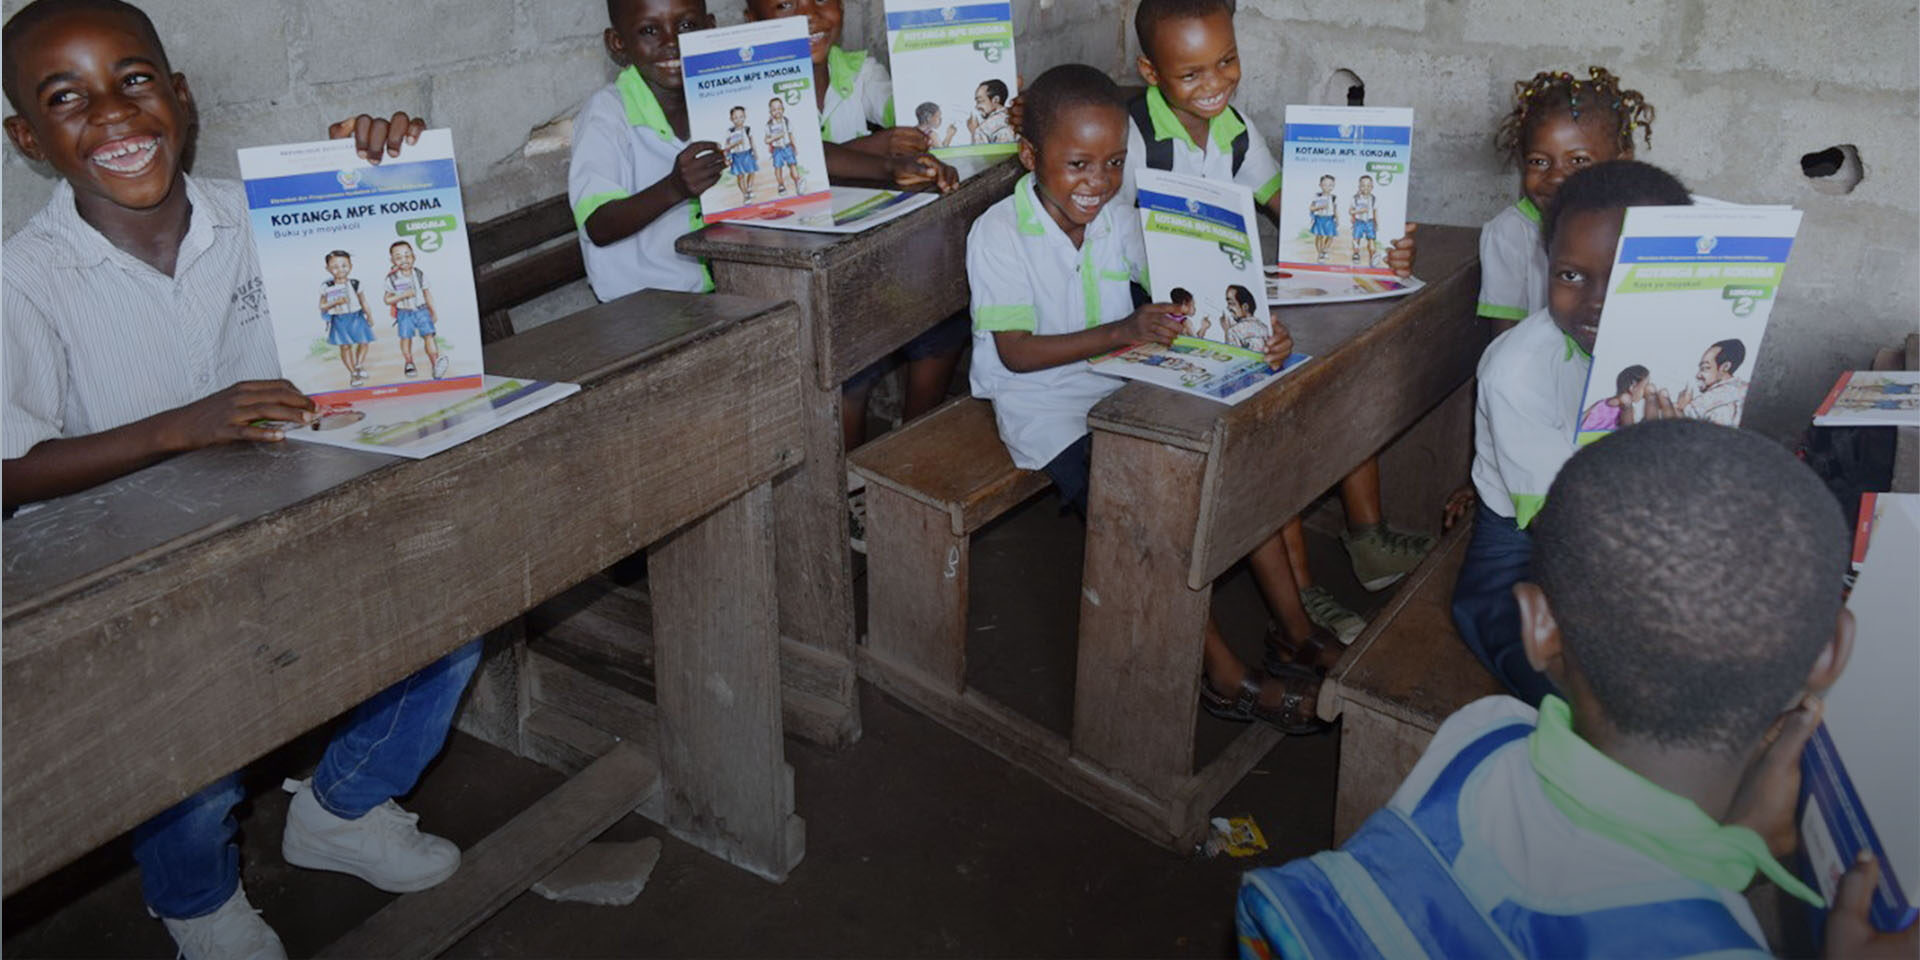 Image of children sitting at school desks and smiling as they hold up activity books.